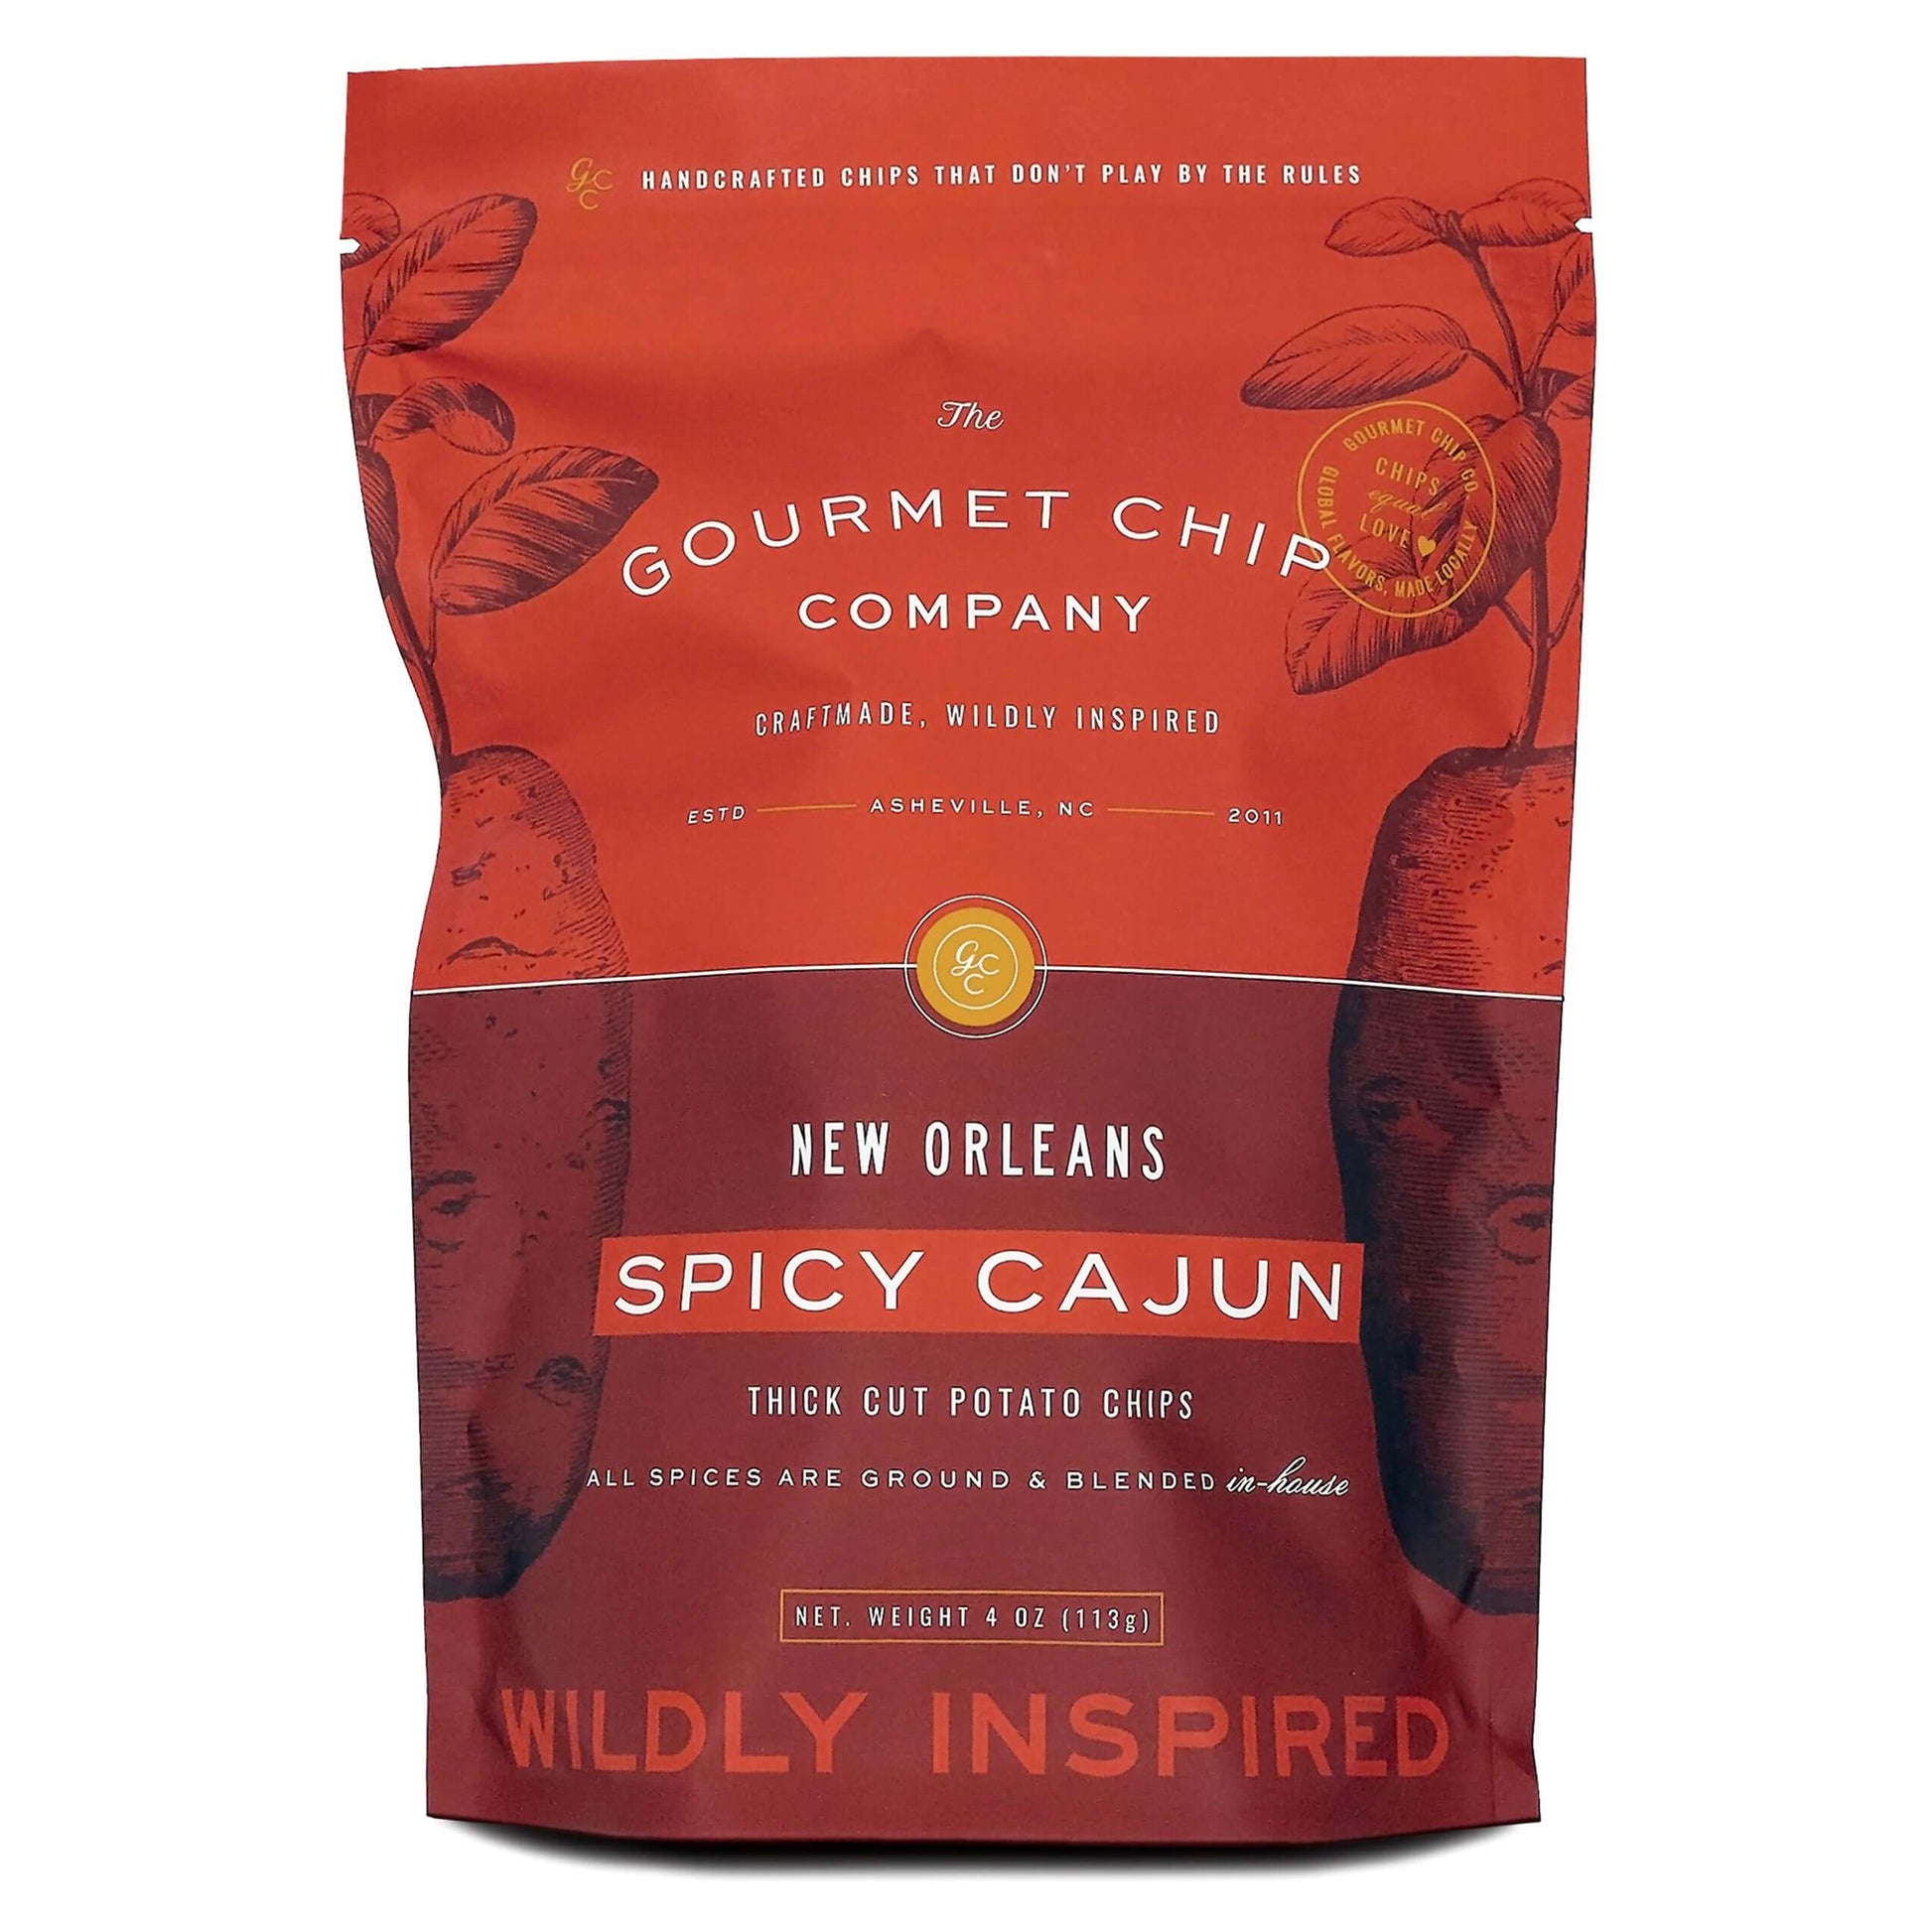 New Orleans Spicy Cajun Thick Cut Potato Chips